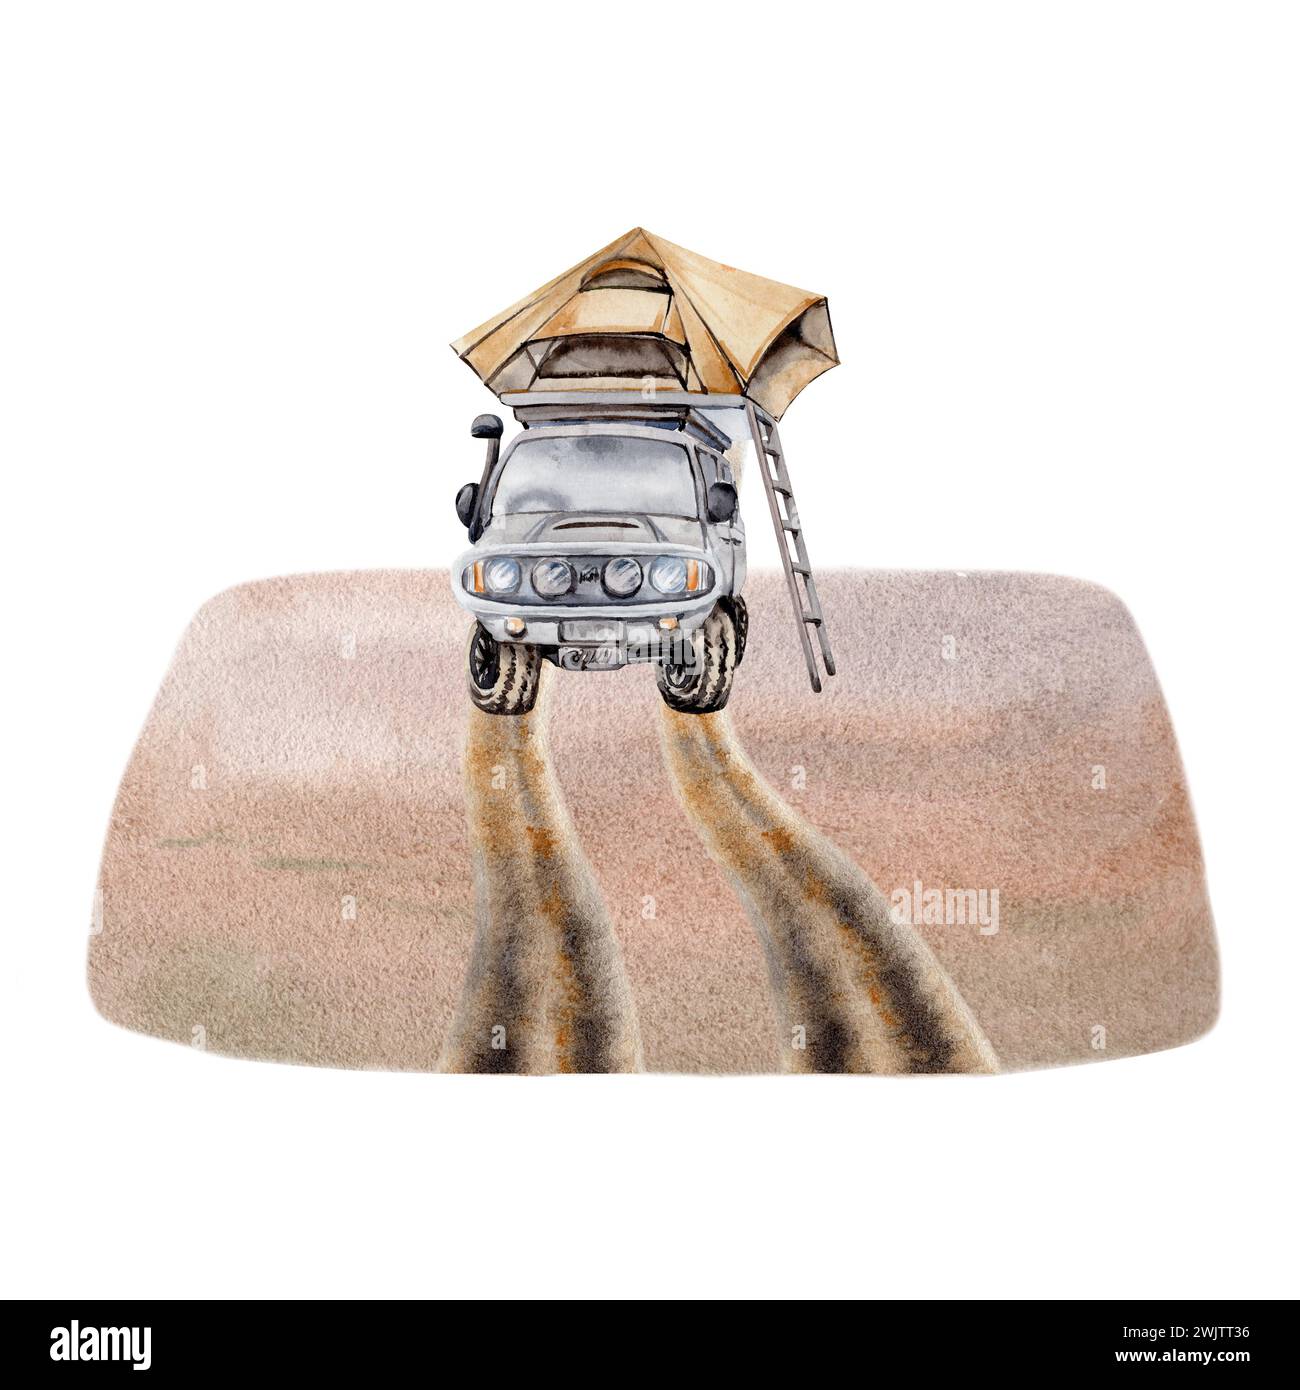 4WD car with roof top tent and ladder. Tyre tracks on sandy dirt road. Design for camping, adventure, tourism, outdoors Watercolor Illustration Stock Photo